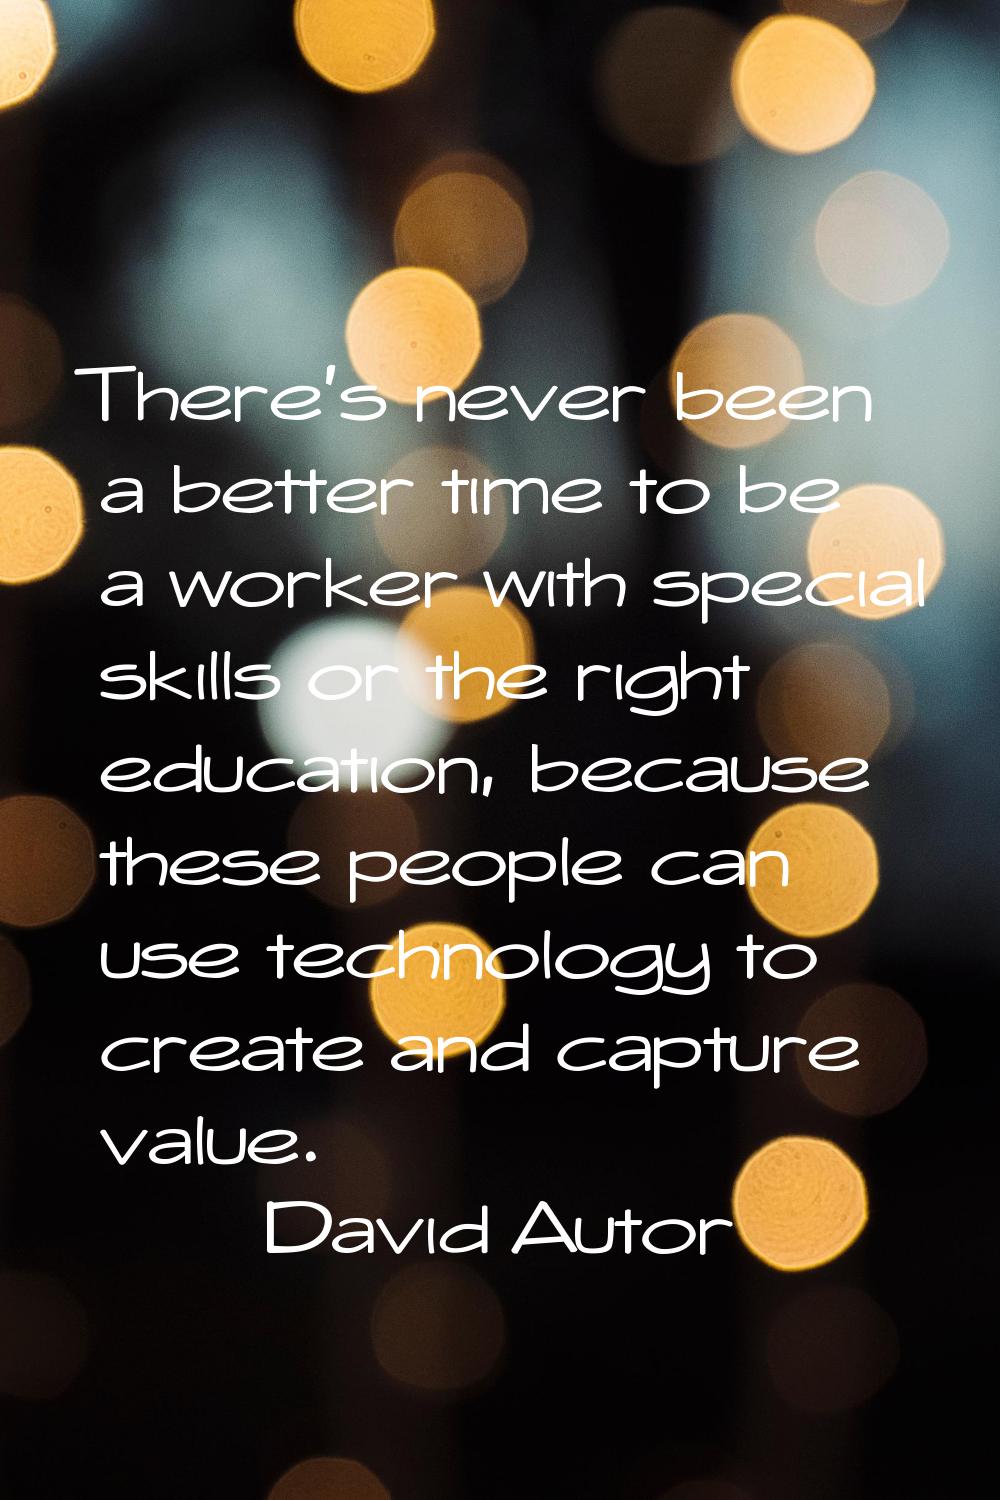 There's never been a better time to be a worker with special skills or the right education, because